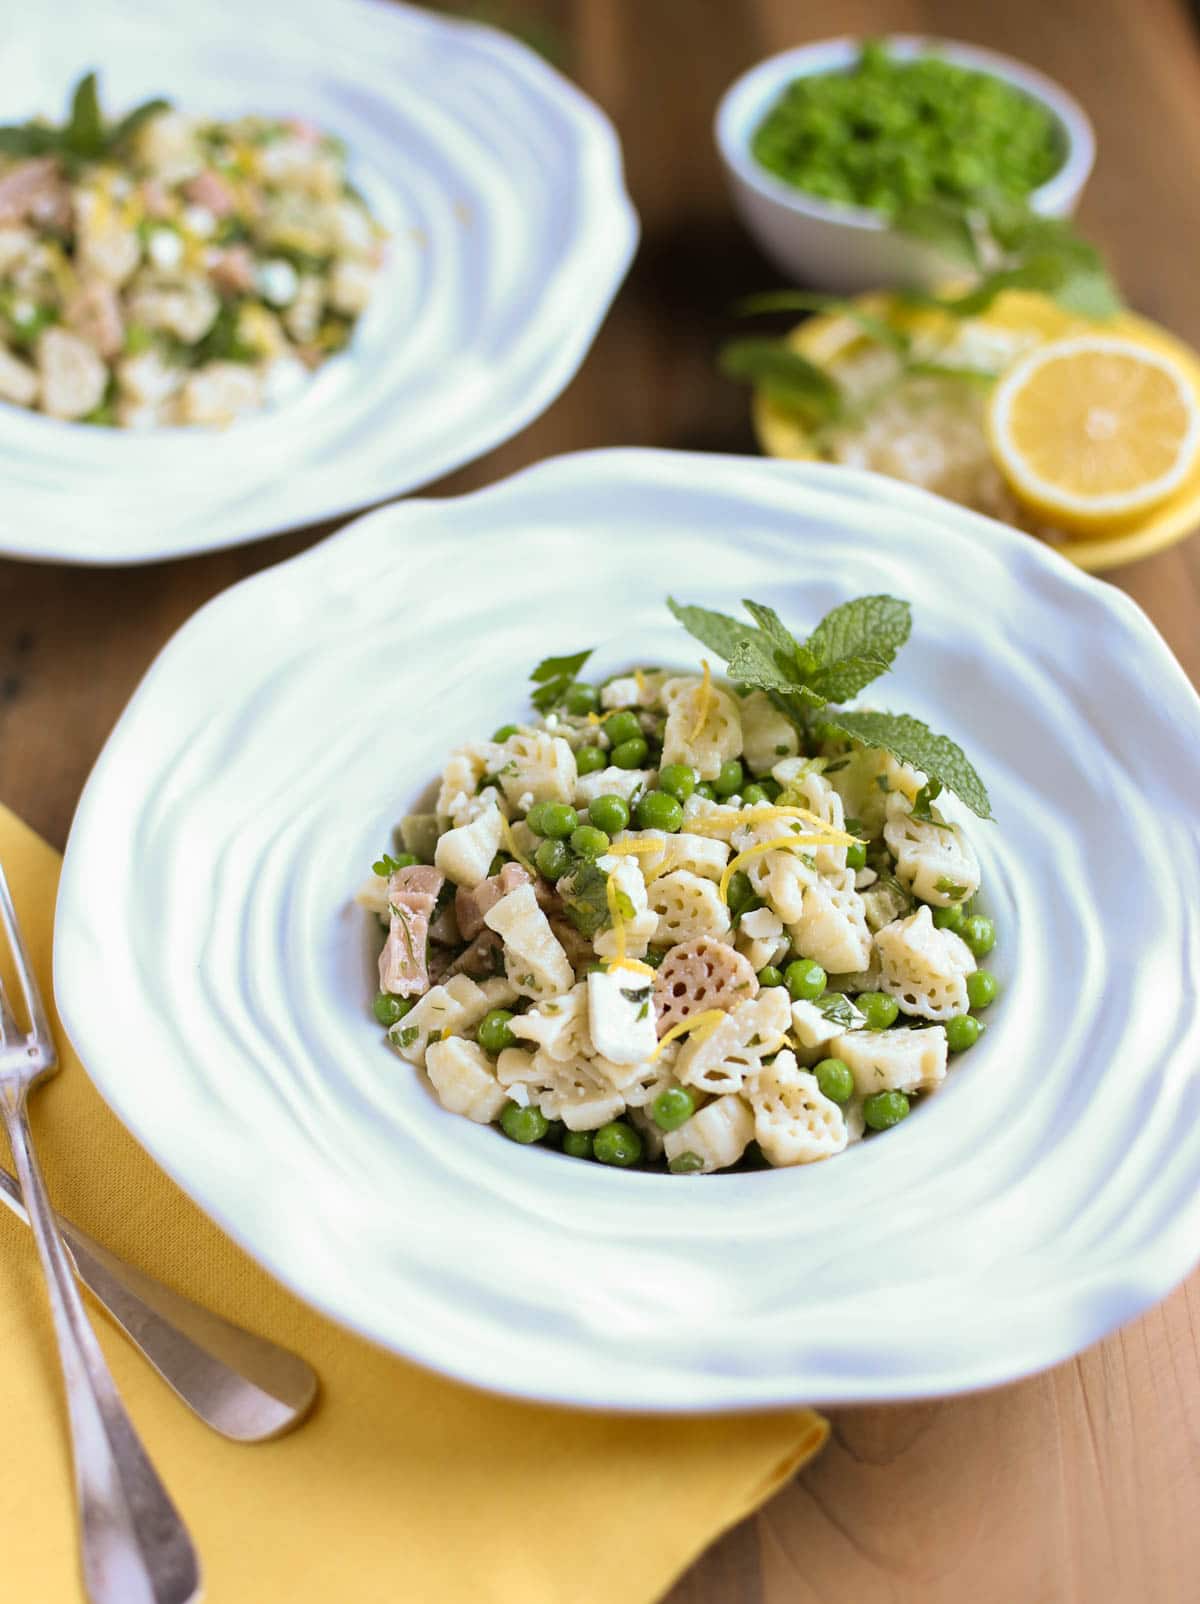 Light and Herby Mediterranean Pasta Salad | Lemon, Feta, and Fresh Chopped Herbs make this a light and delicious side dish! A tangy vinaigrette dressing ties it all together...yum! Great with any grilled meats or seafood! | WorldofPastabilities.com